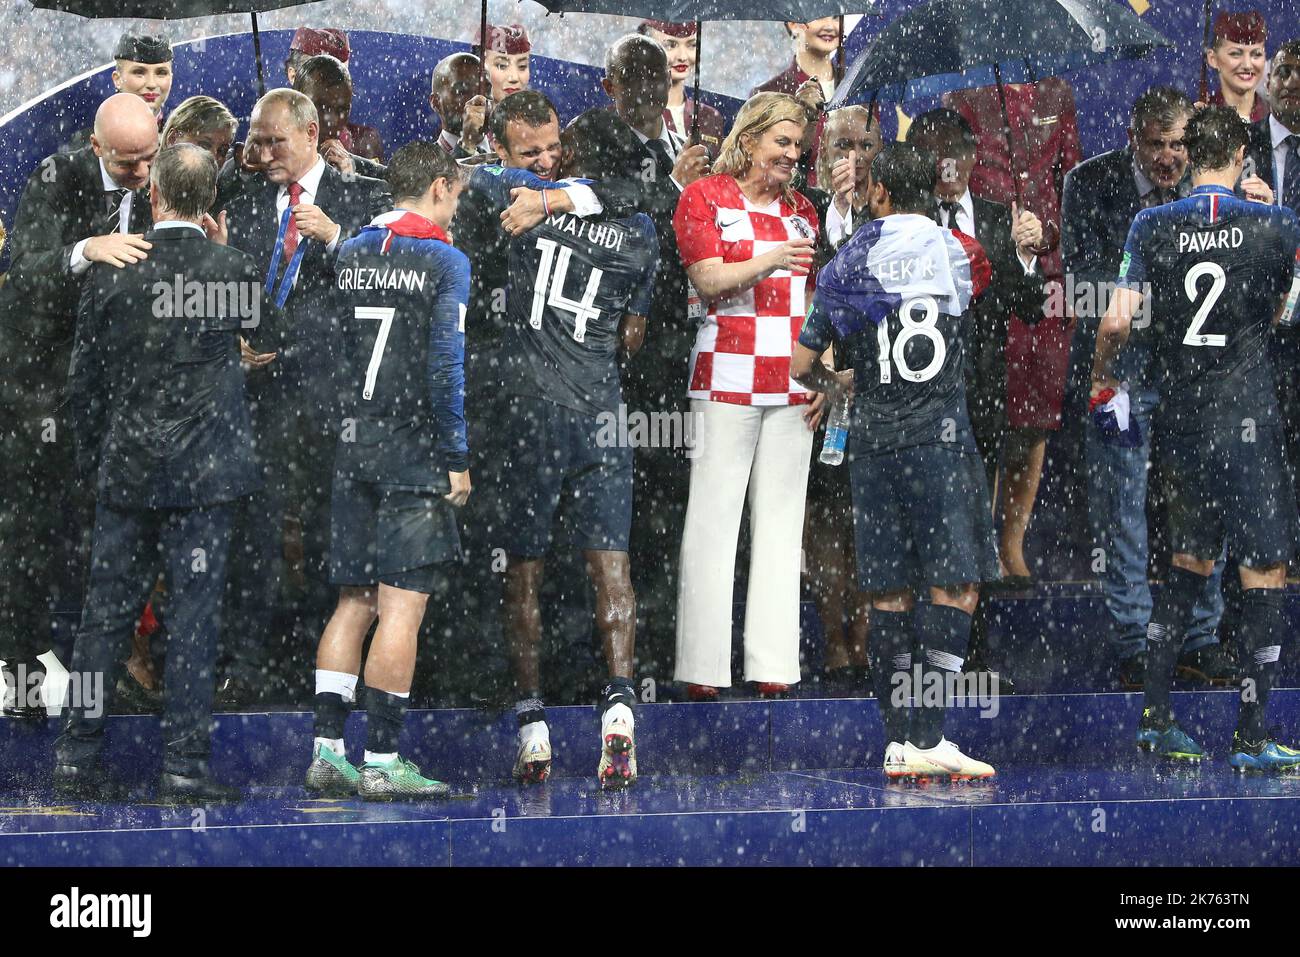 FIFA World Cup Russia 2018, Final Football Match France versus Croatia, France is the new World Champion. France won the World Cup for the second time 4-2 against Croatia. Pictured: French President Emmanuel Macron congrates French player, Antoine Griezmann, FRA14 MF Blaise Matuidi, FRA18 FW Nabil Fekir © Pierre Teyssot / Maxppp Stock Photo